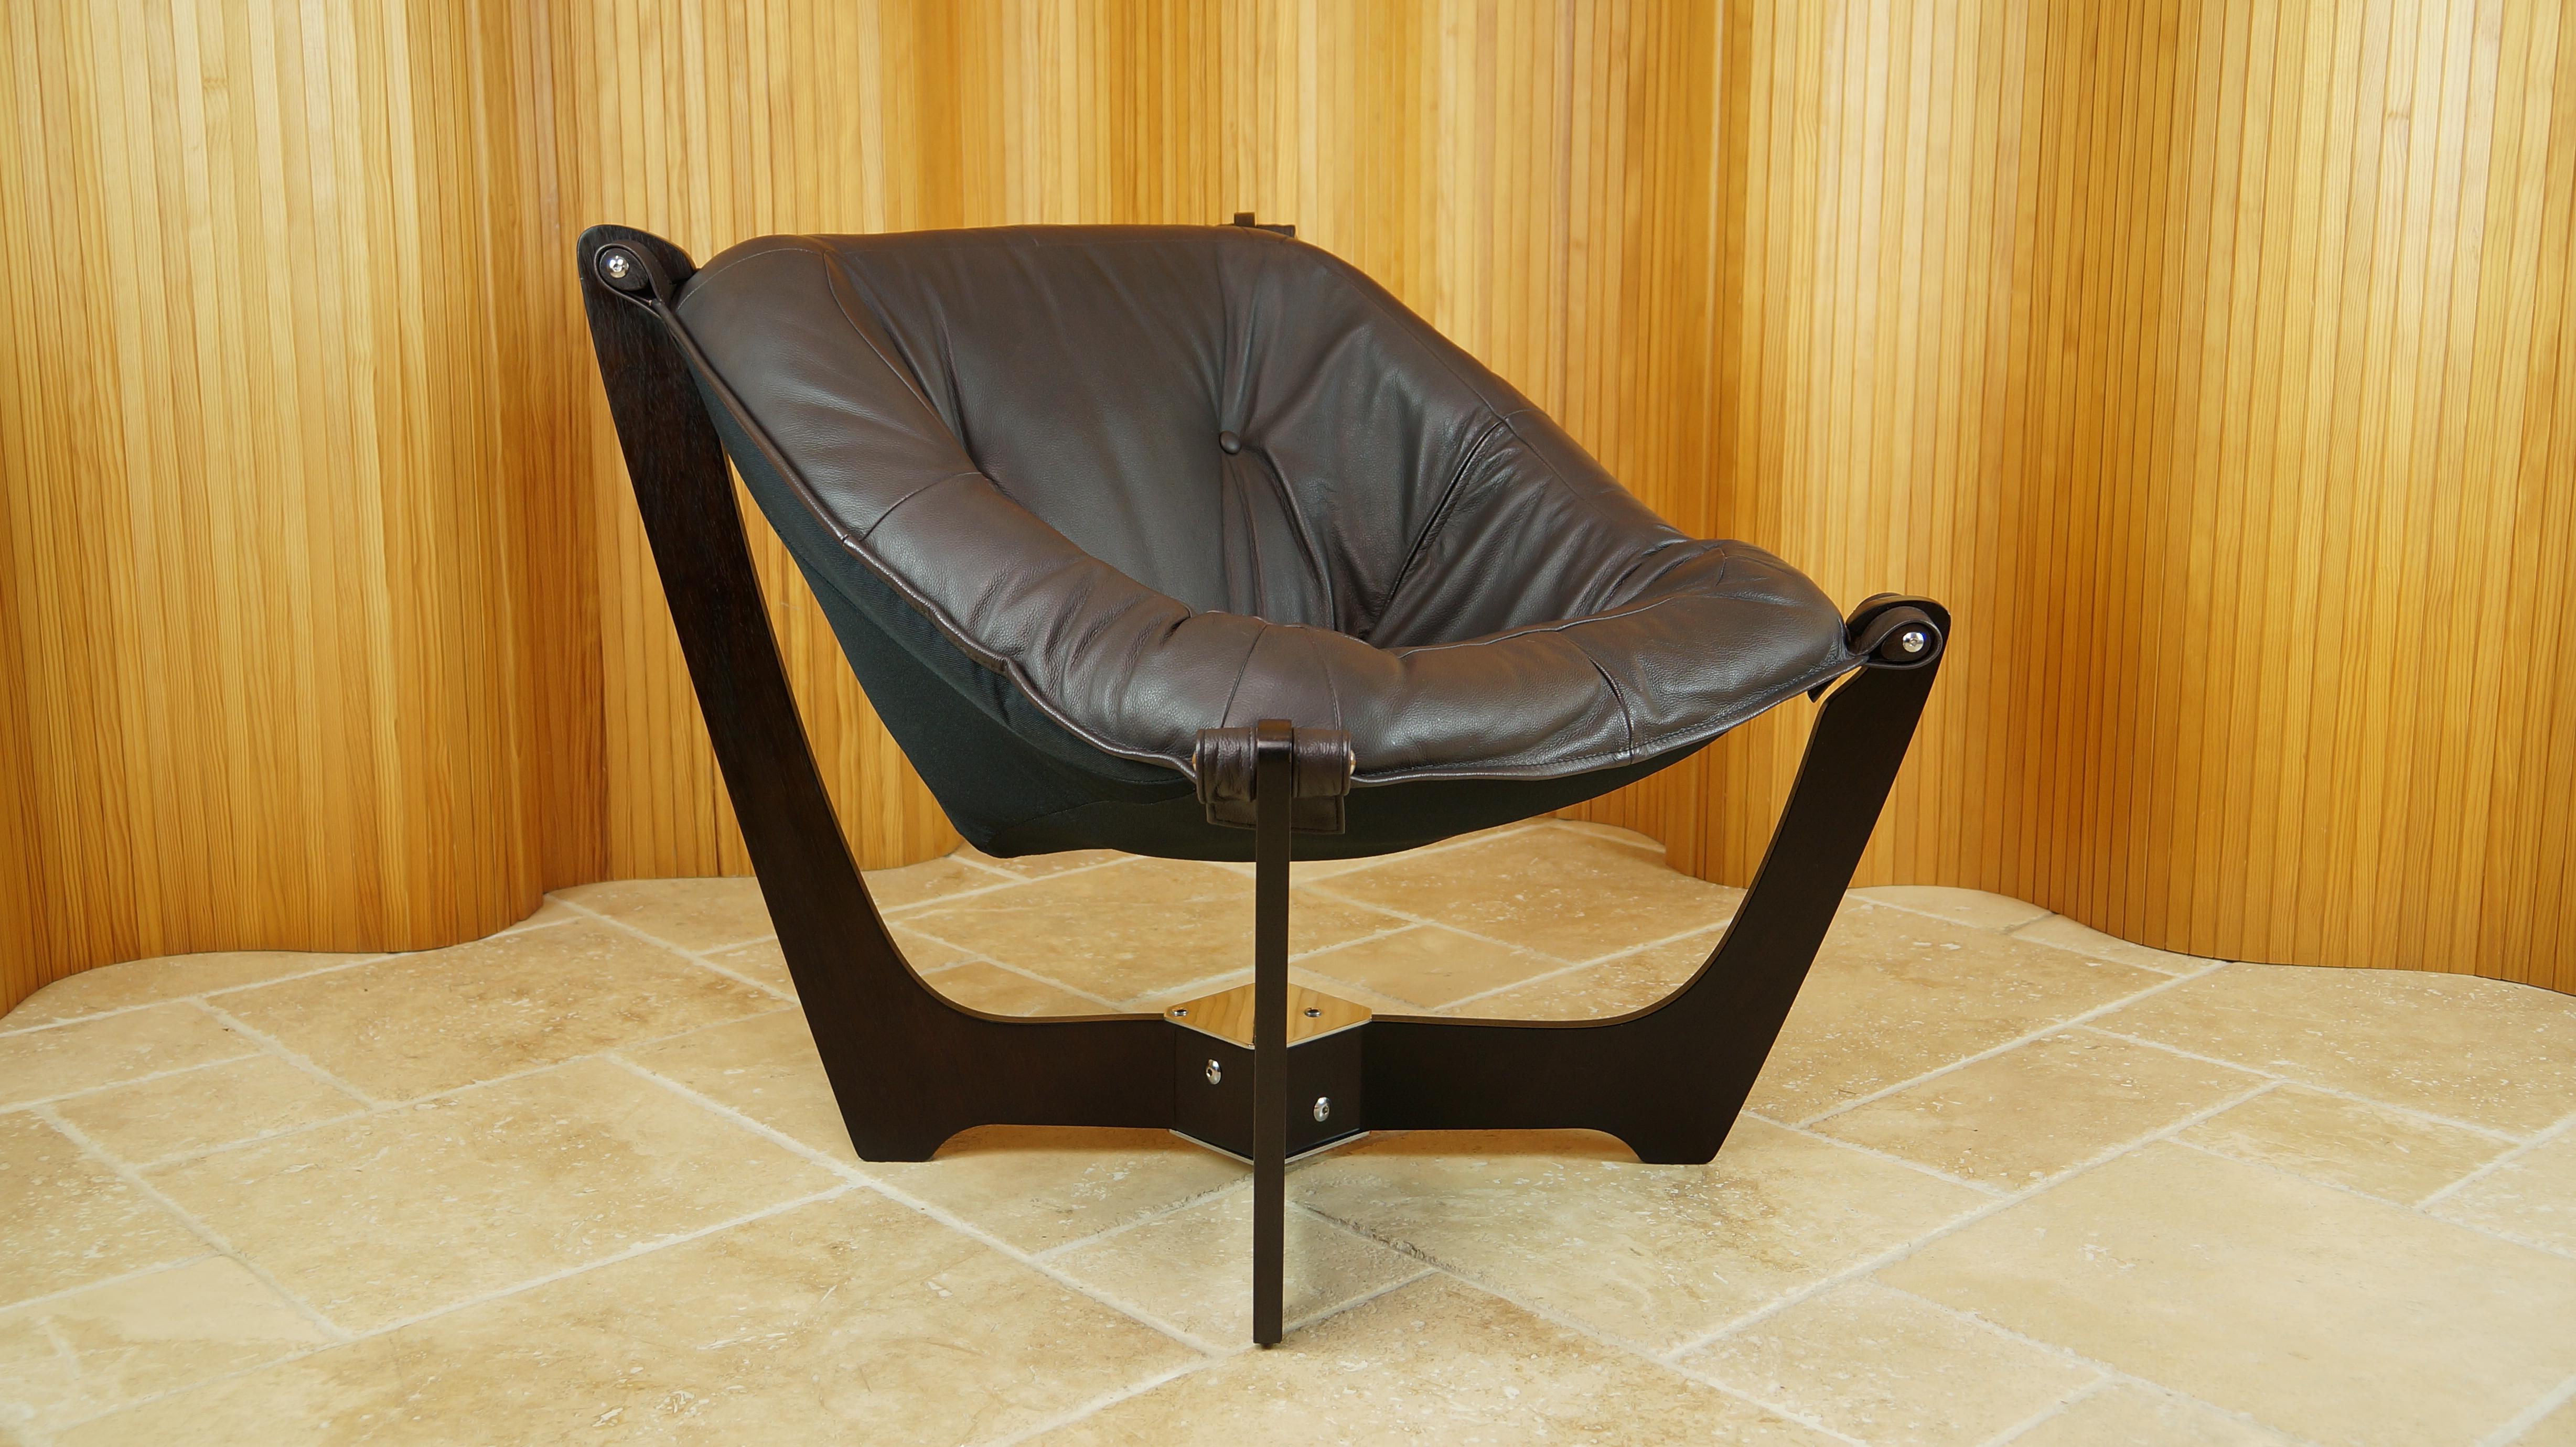 A wonderful 'Luna' armchair by Odd Knutsen for Hjellegjerde, Norway.

Frame of dark stained wood, mounted with dark brown leather seat designed in the 1970s.

Exceptionally comfortable, in absolutely excellent condition throughout and has just